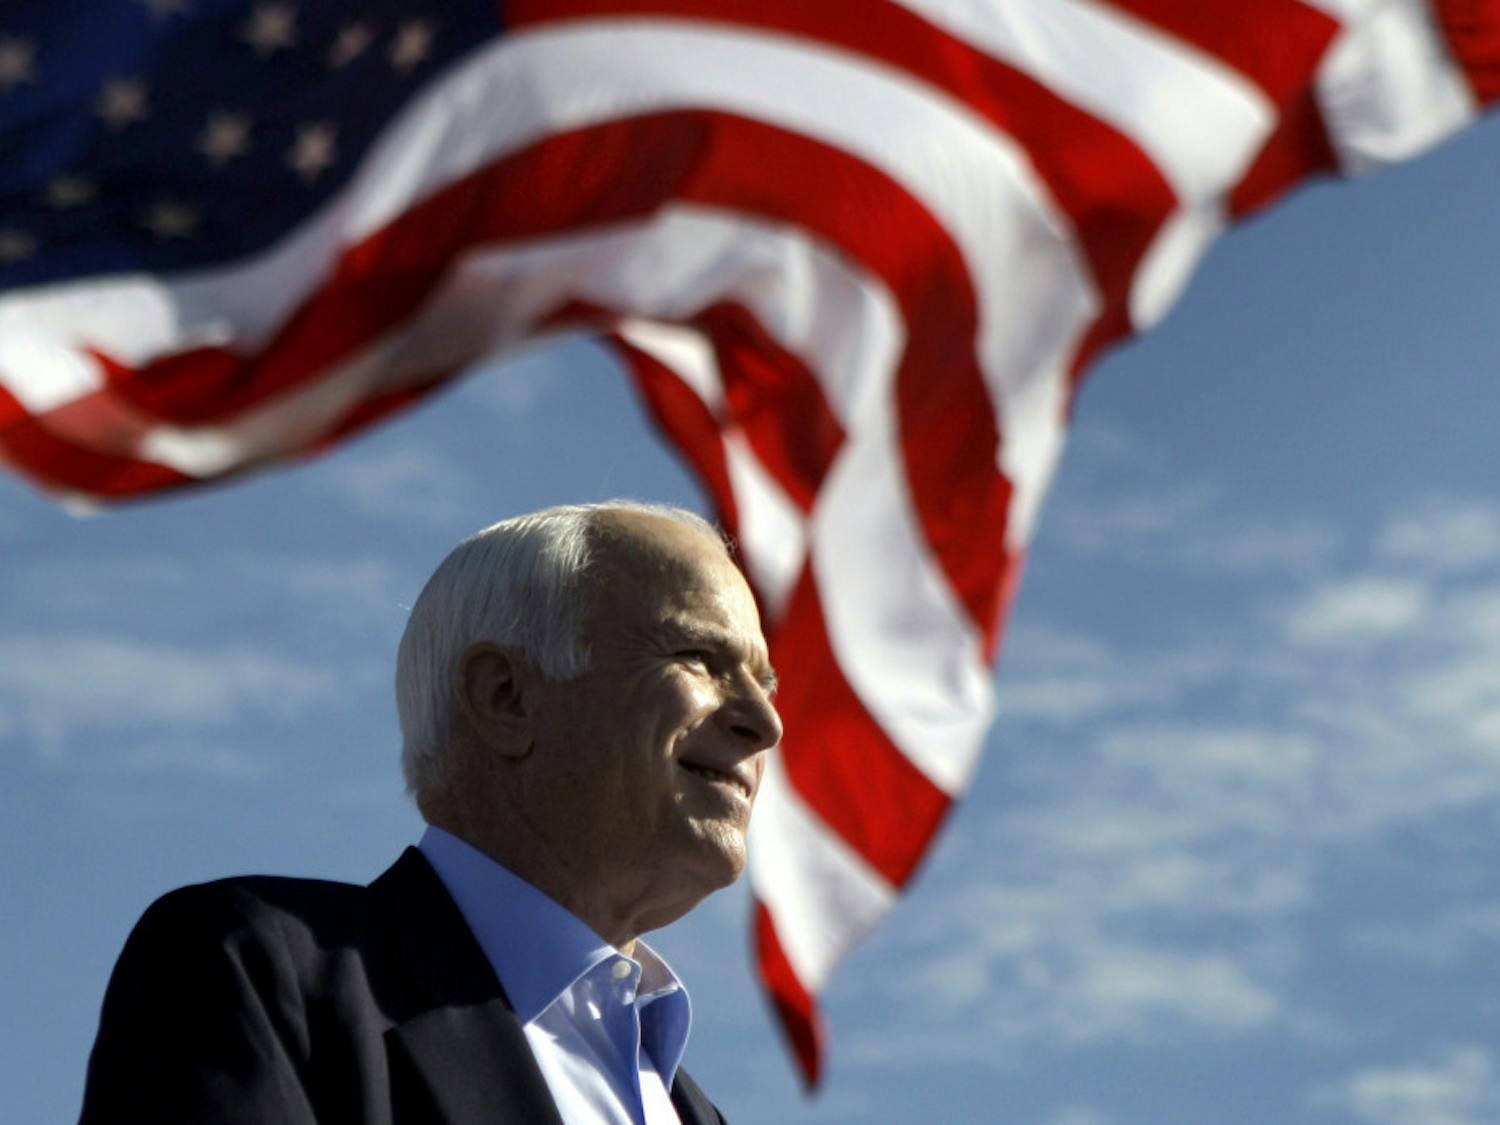 Republican presidential candidate Sen. John McCain, R-Ariz., speaks at a 2008 rally in Tampa, Fla. Aide says senator, war hero and GOP presidential candidate McCain died Saturday, Aug. 25, 2018. He was 81.